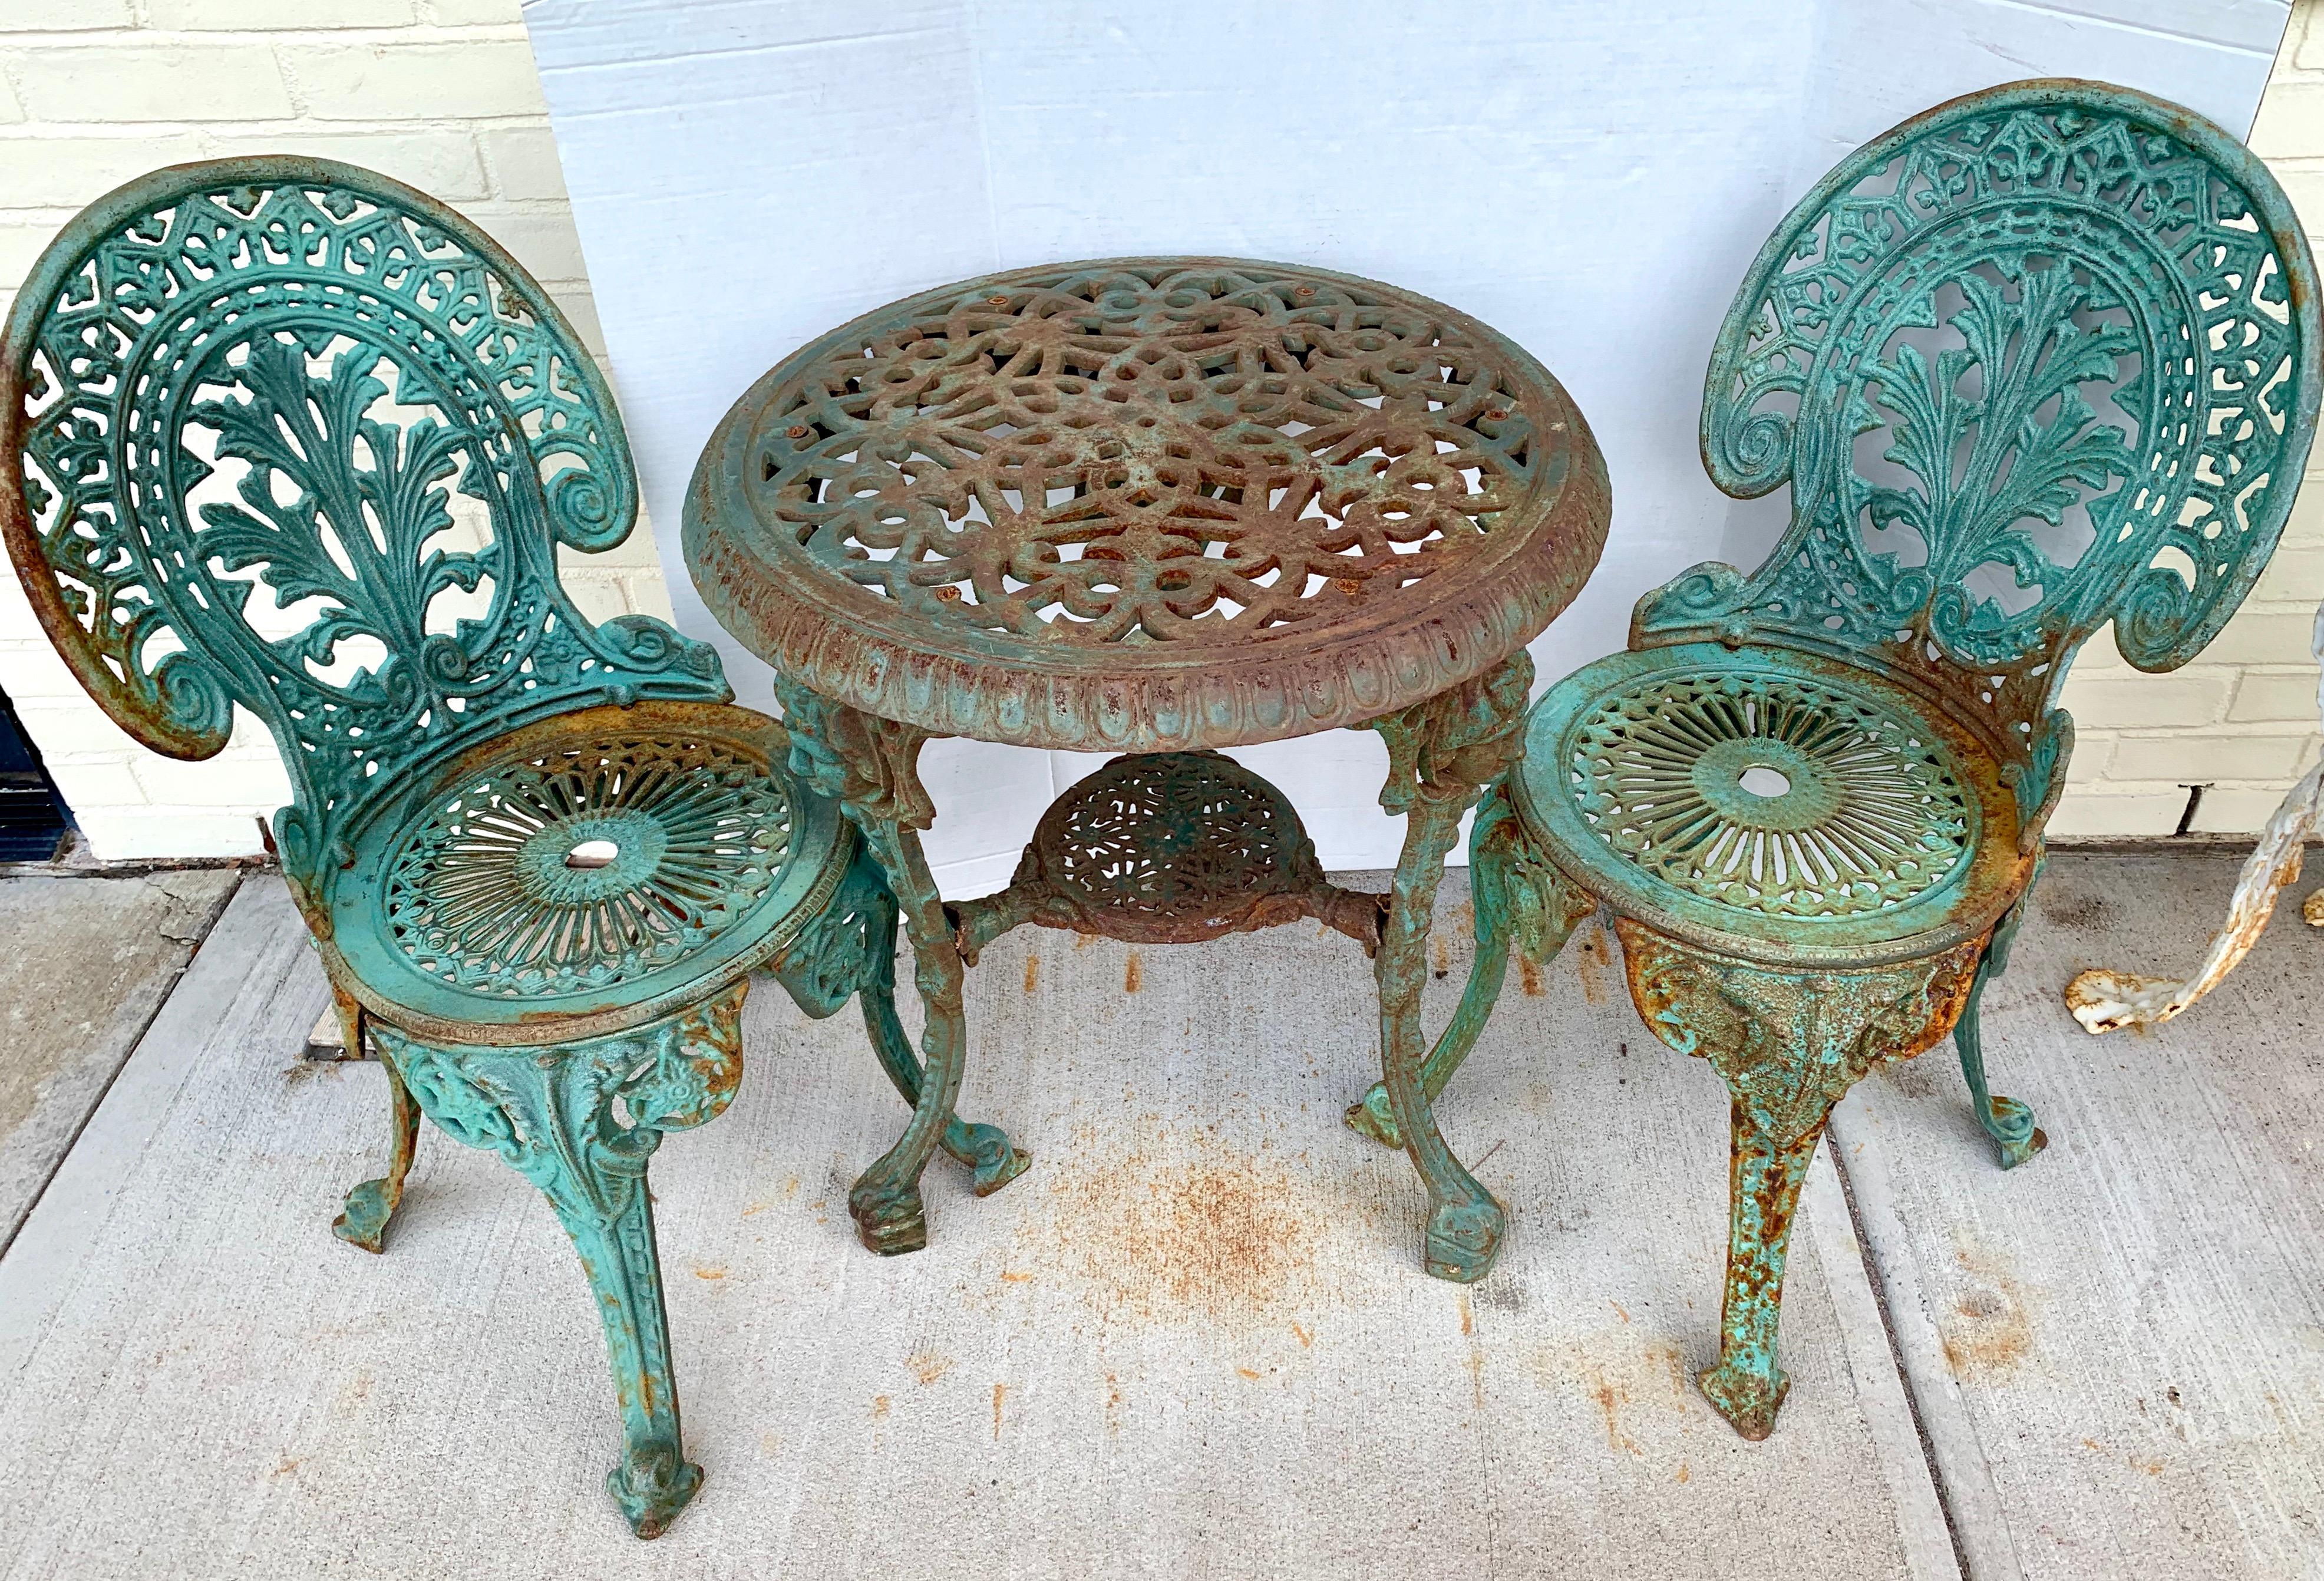 Lovely antique green cast iron outdoor bistro set that includes a round table and two chairs. The set has remarkable figural detail which is highlighted by the three carved Roman male heads that adorn the three
legs of the table. The set has quite